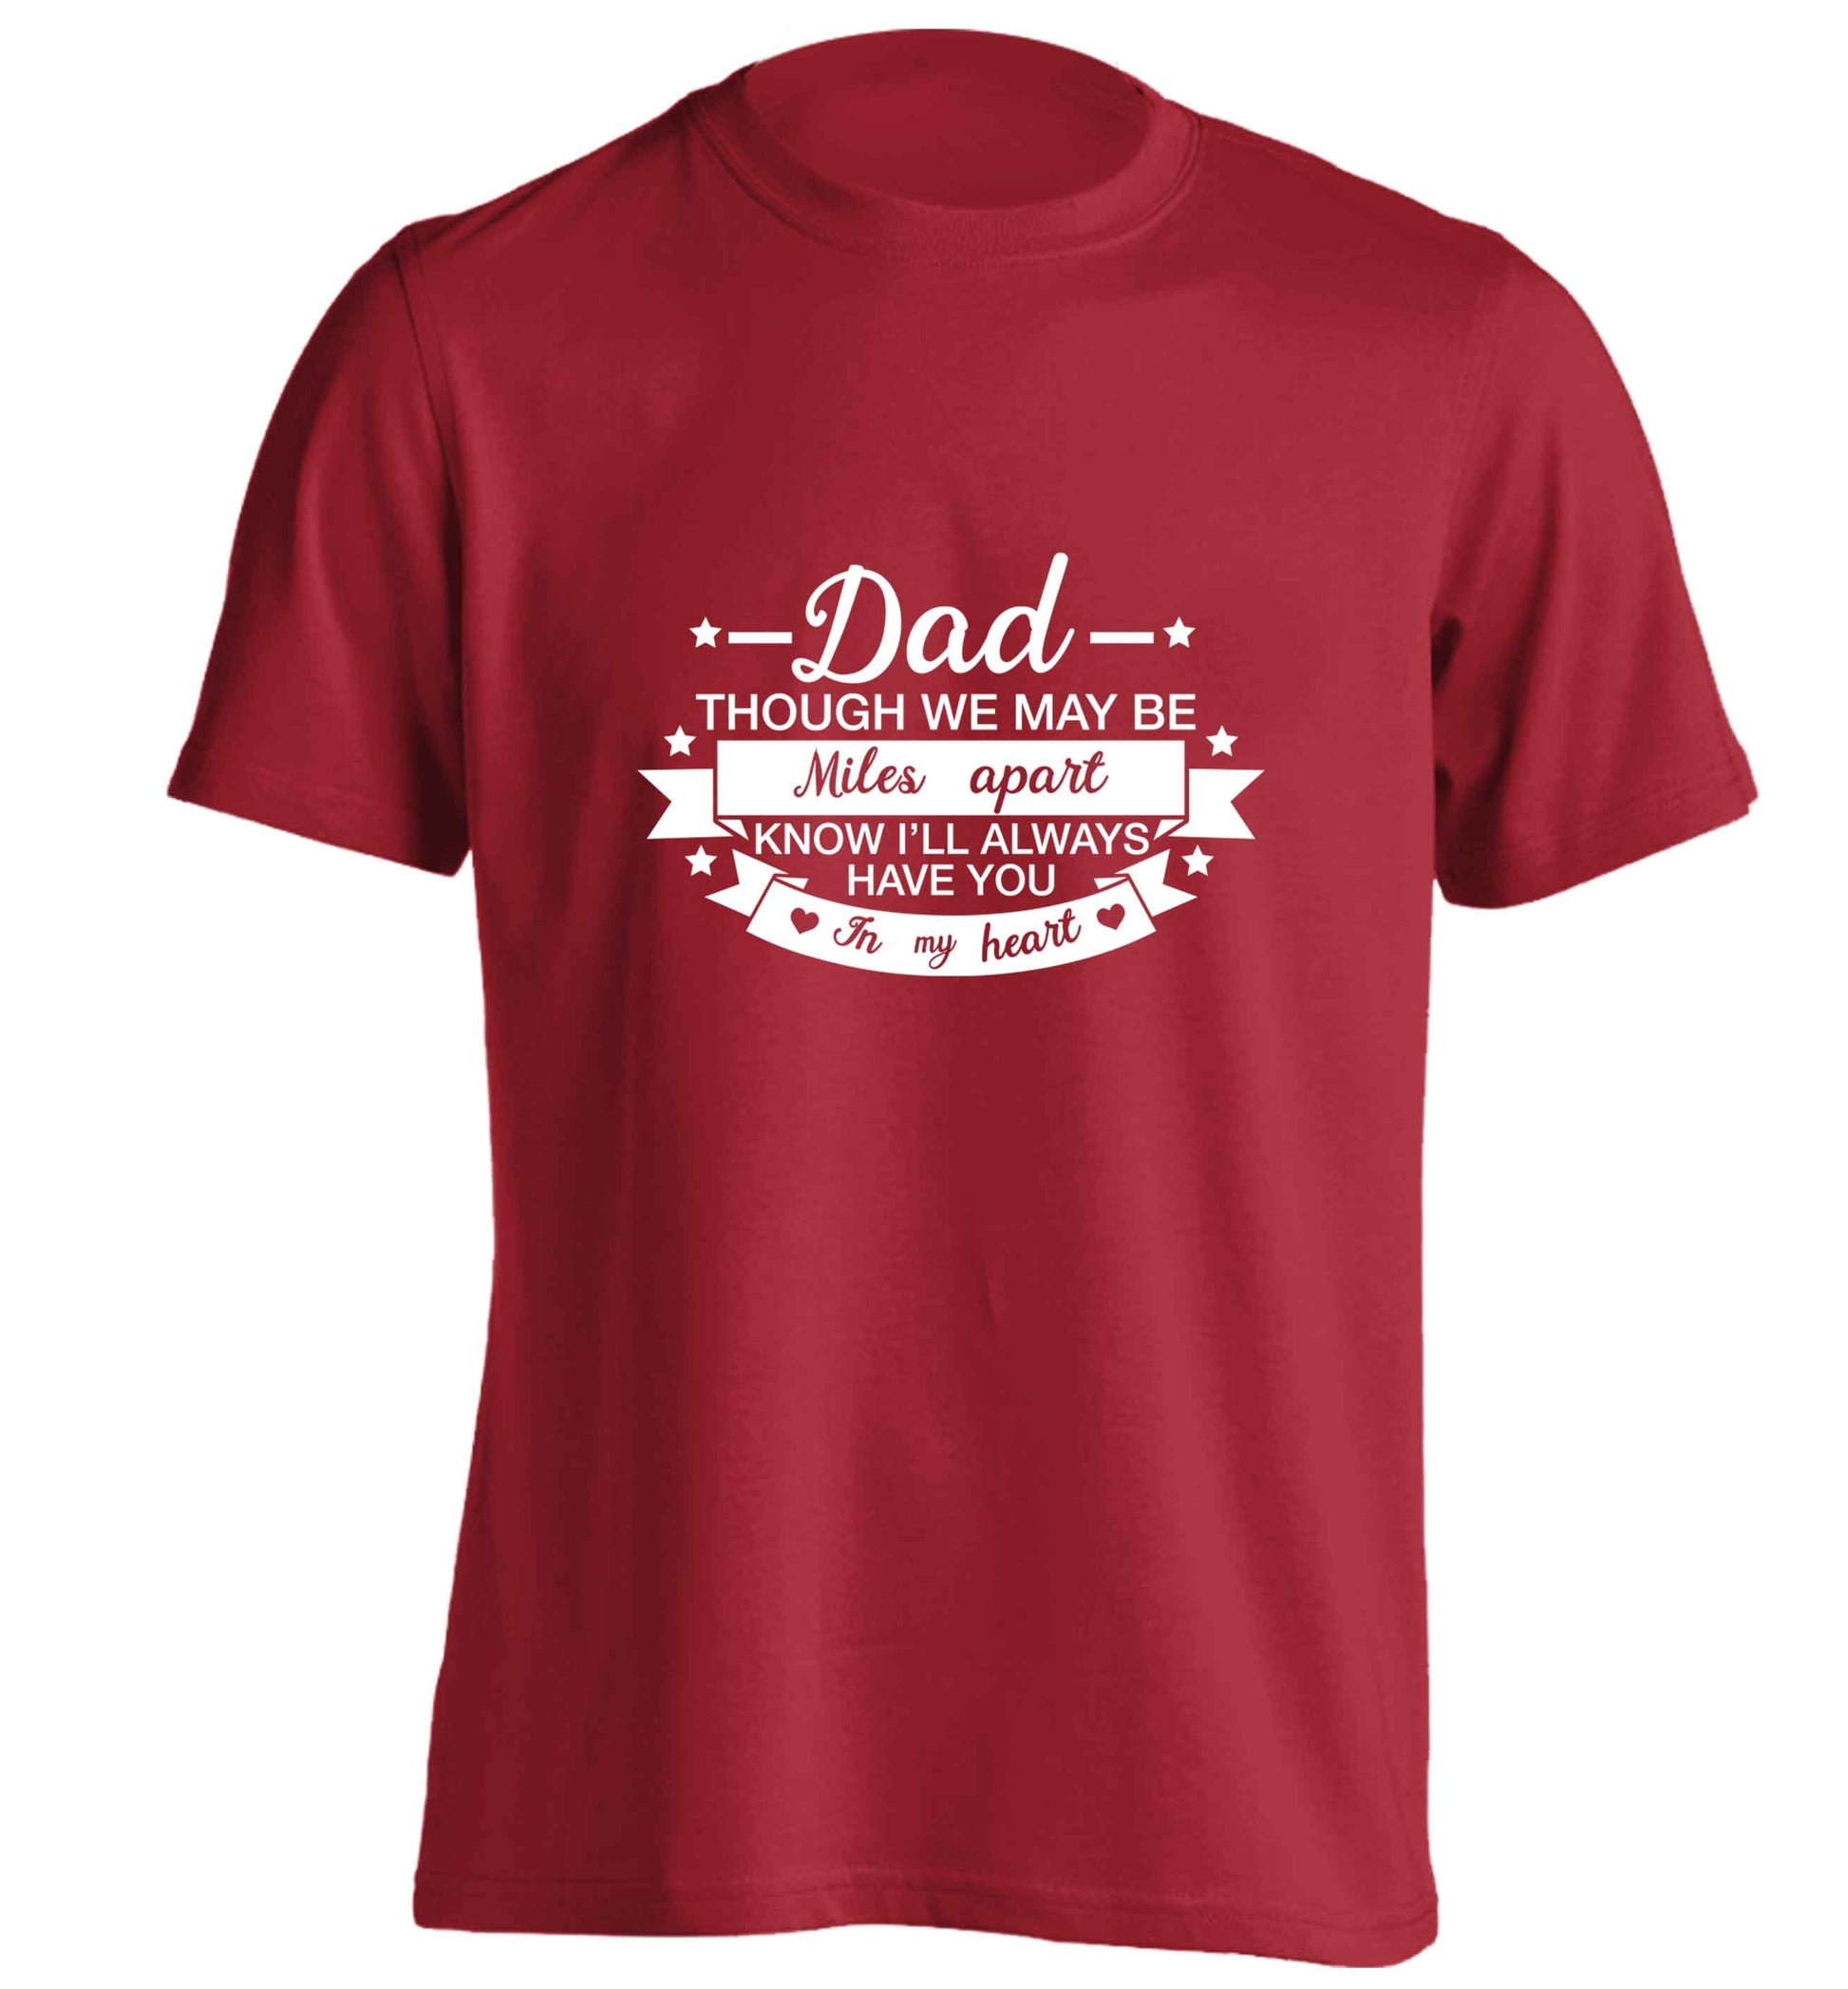 Dad though we are miles apart know I'll always have you in my heart adults unisex red Tshirt 2XL